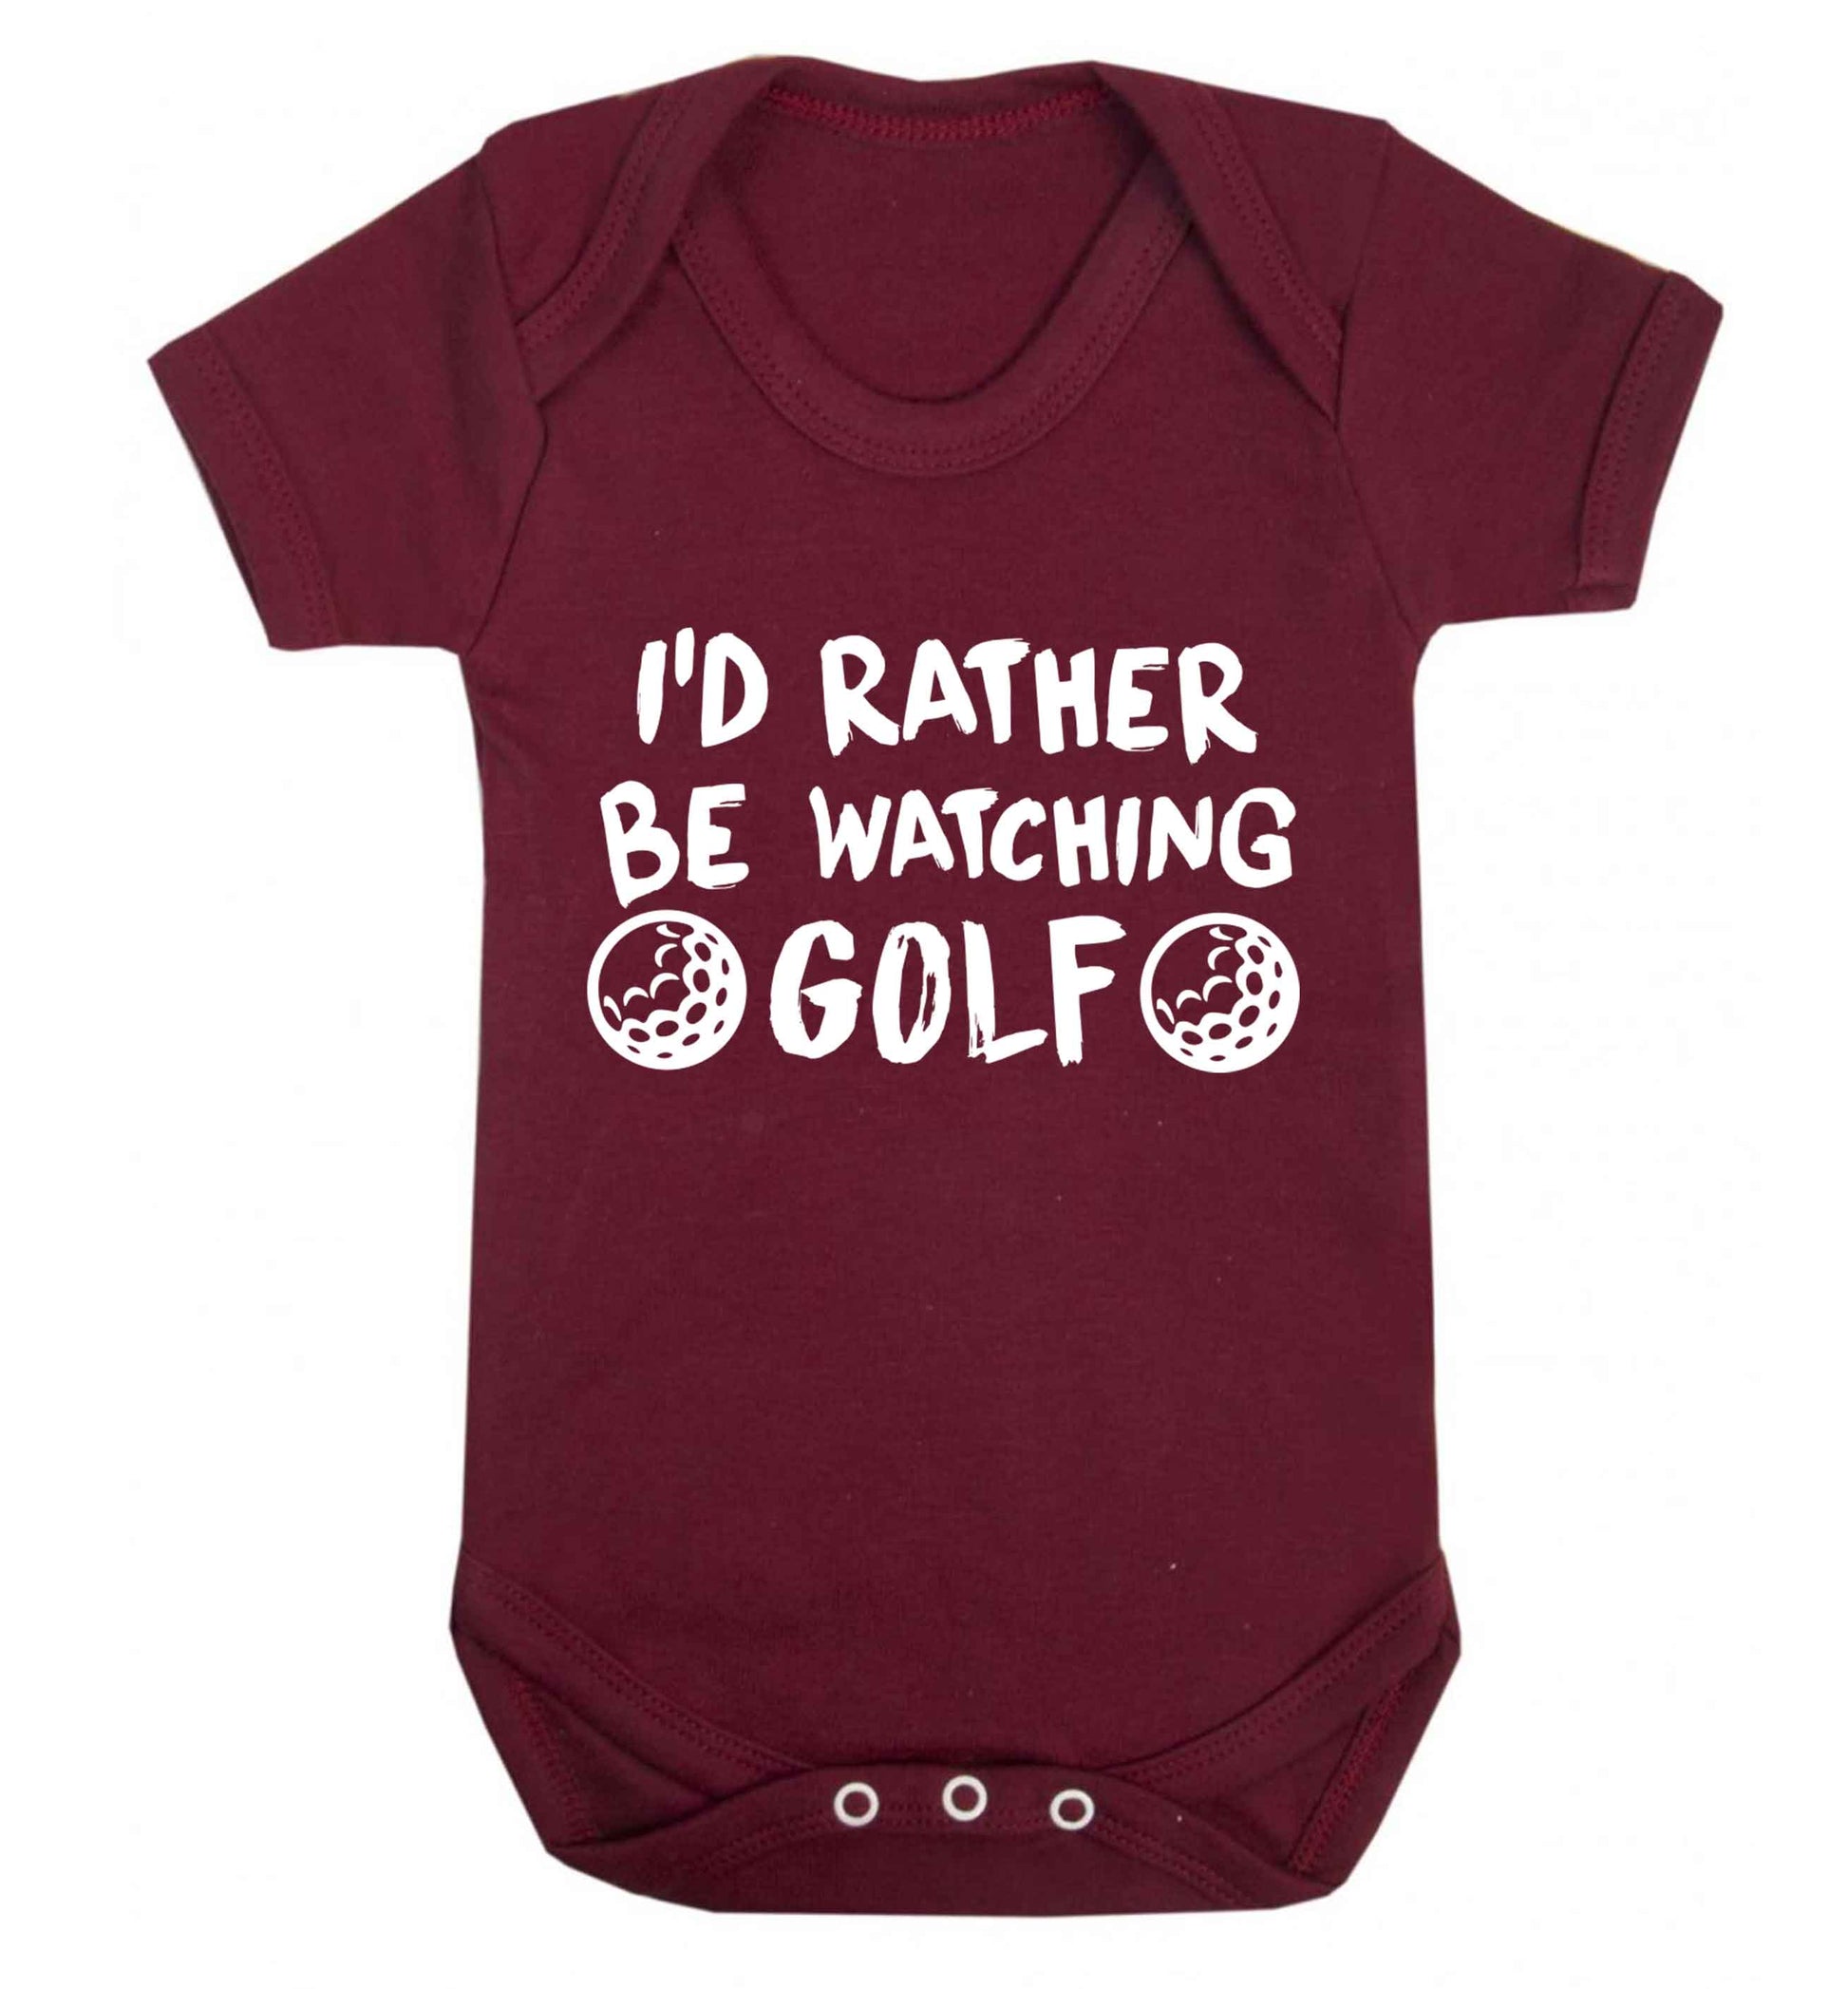 I'd rather be watching golf Baby Vest maroon 18-24 months